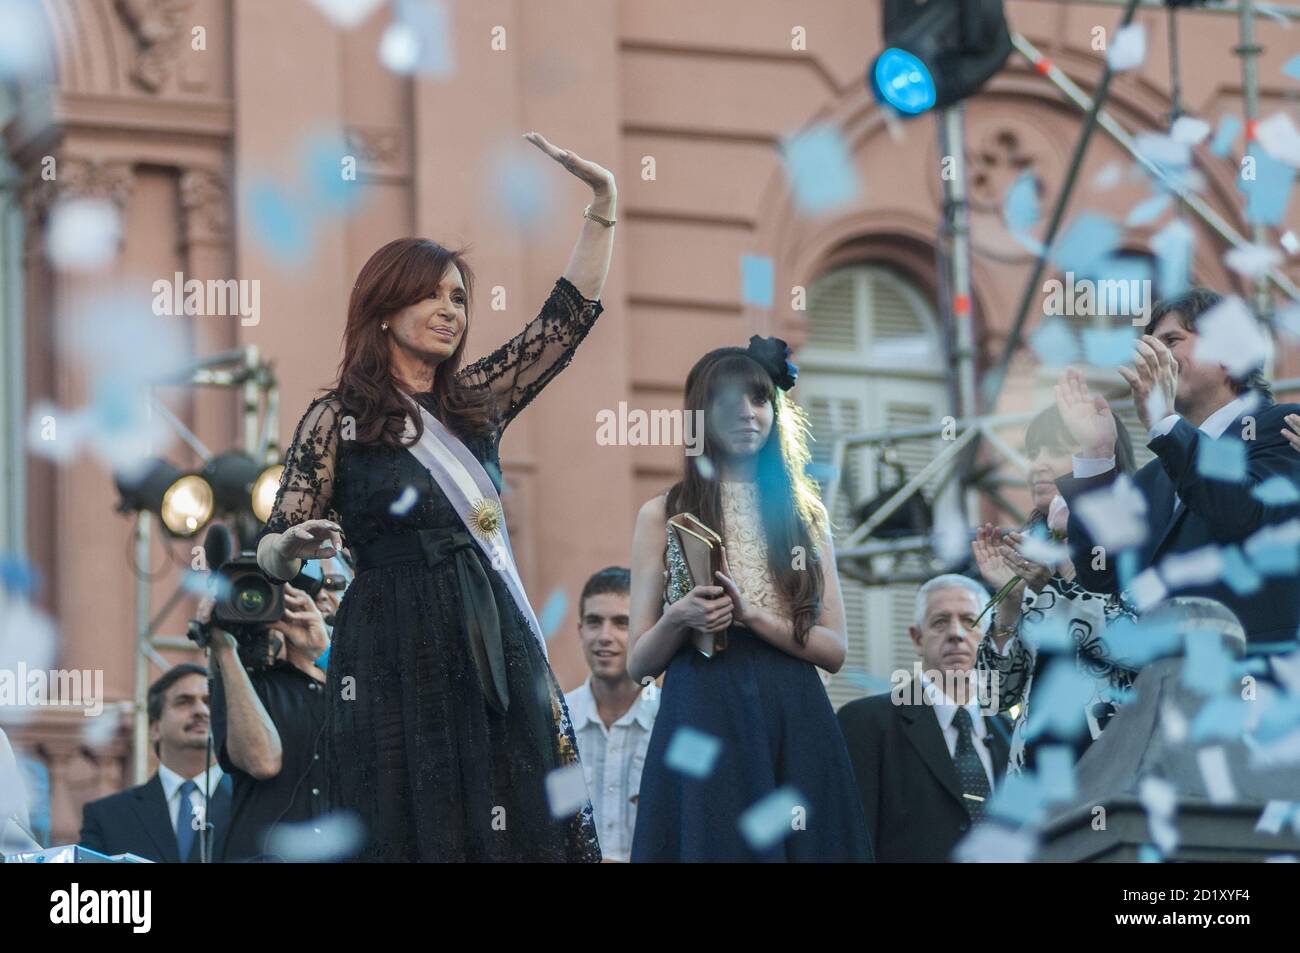 BUENOS AIRES, ARGENTINA - Dec 11, 2011: Former Argentinian President Cristina Fernandez reacts to a crowd of supporters during her second inauguration Stock Photo